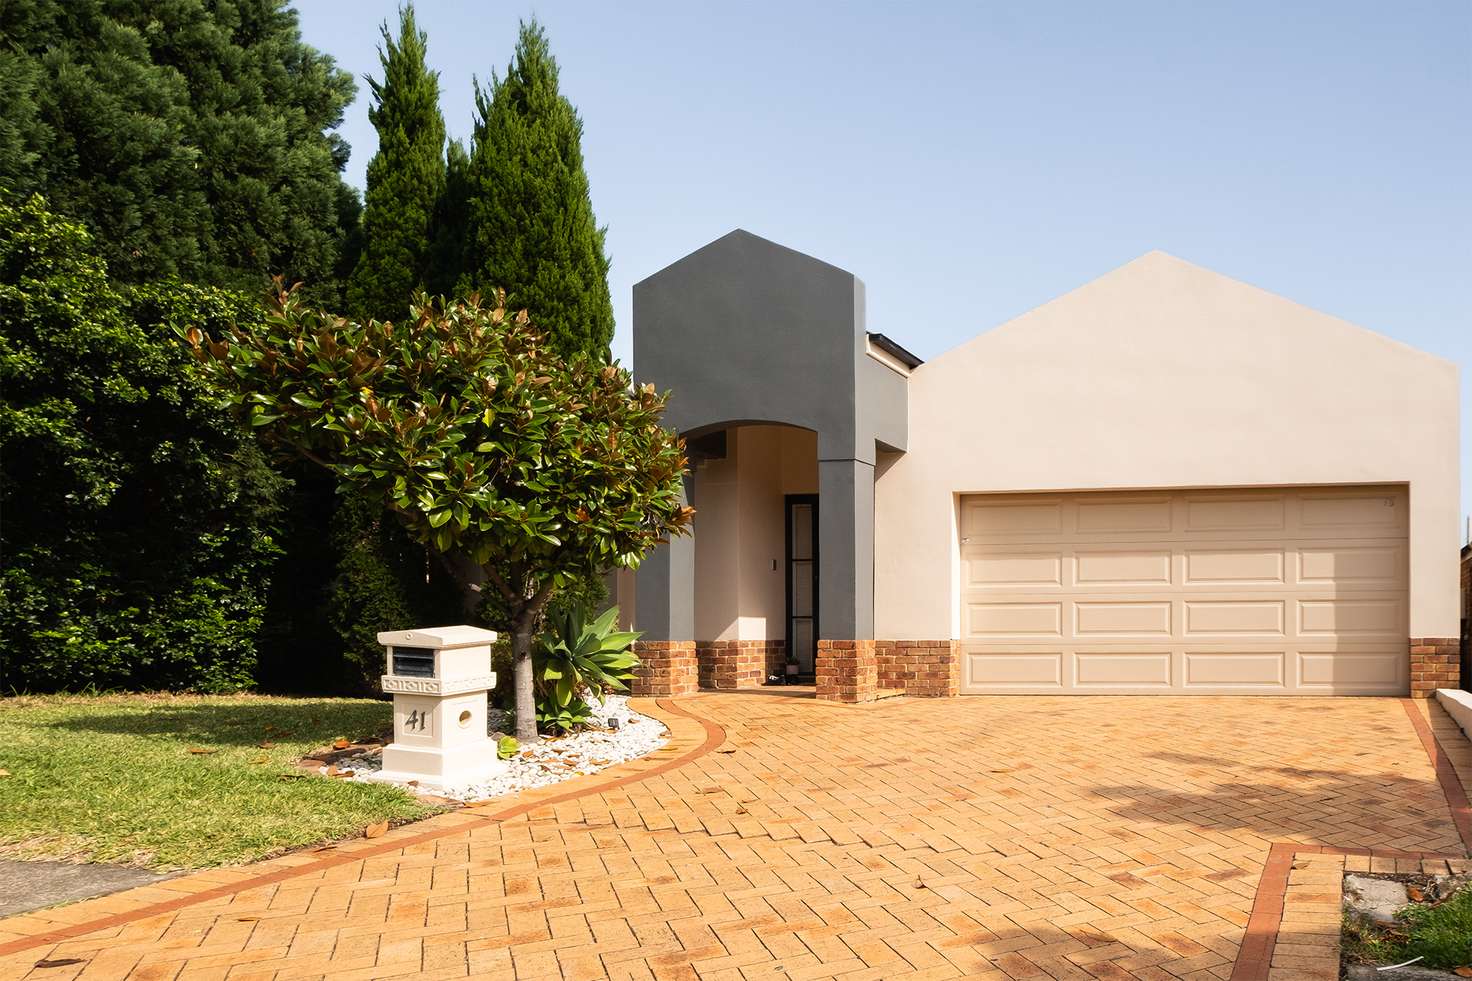 Main view of Homely house listing, 41 Parkwood Street, Plumpton NSW 2761